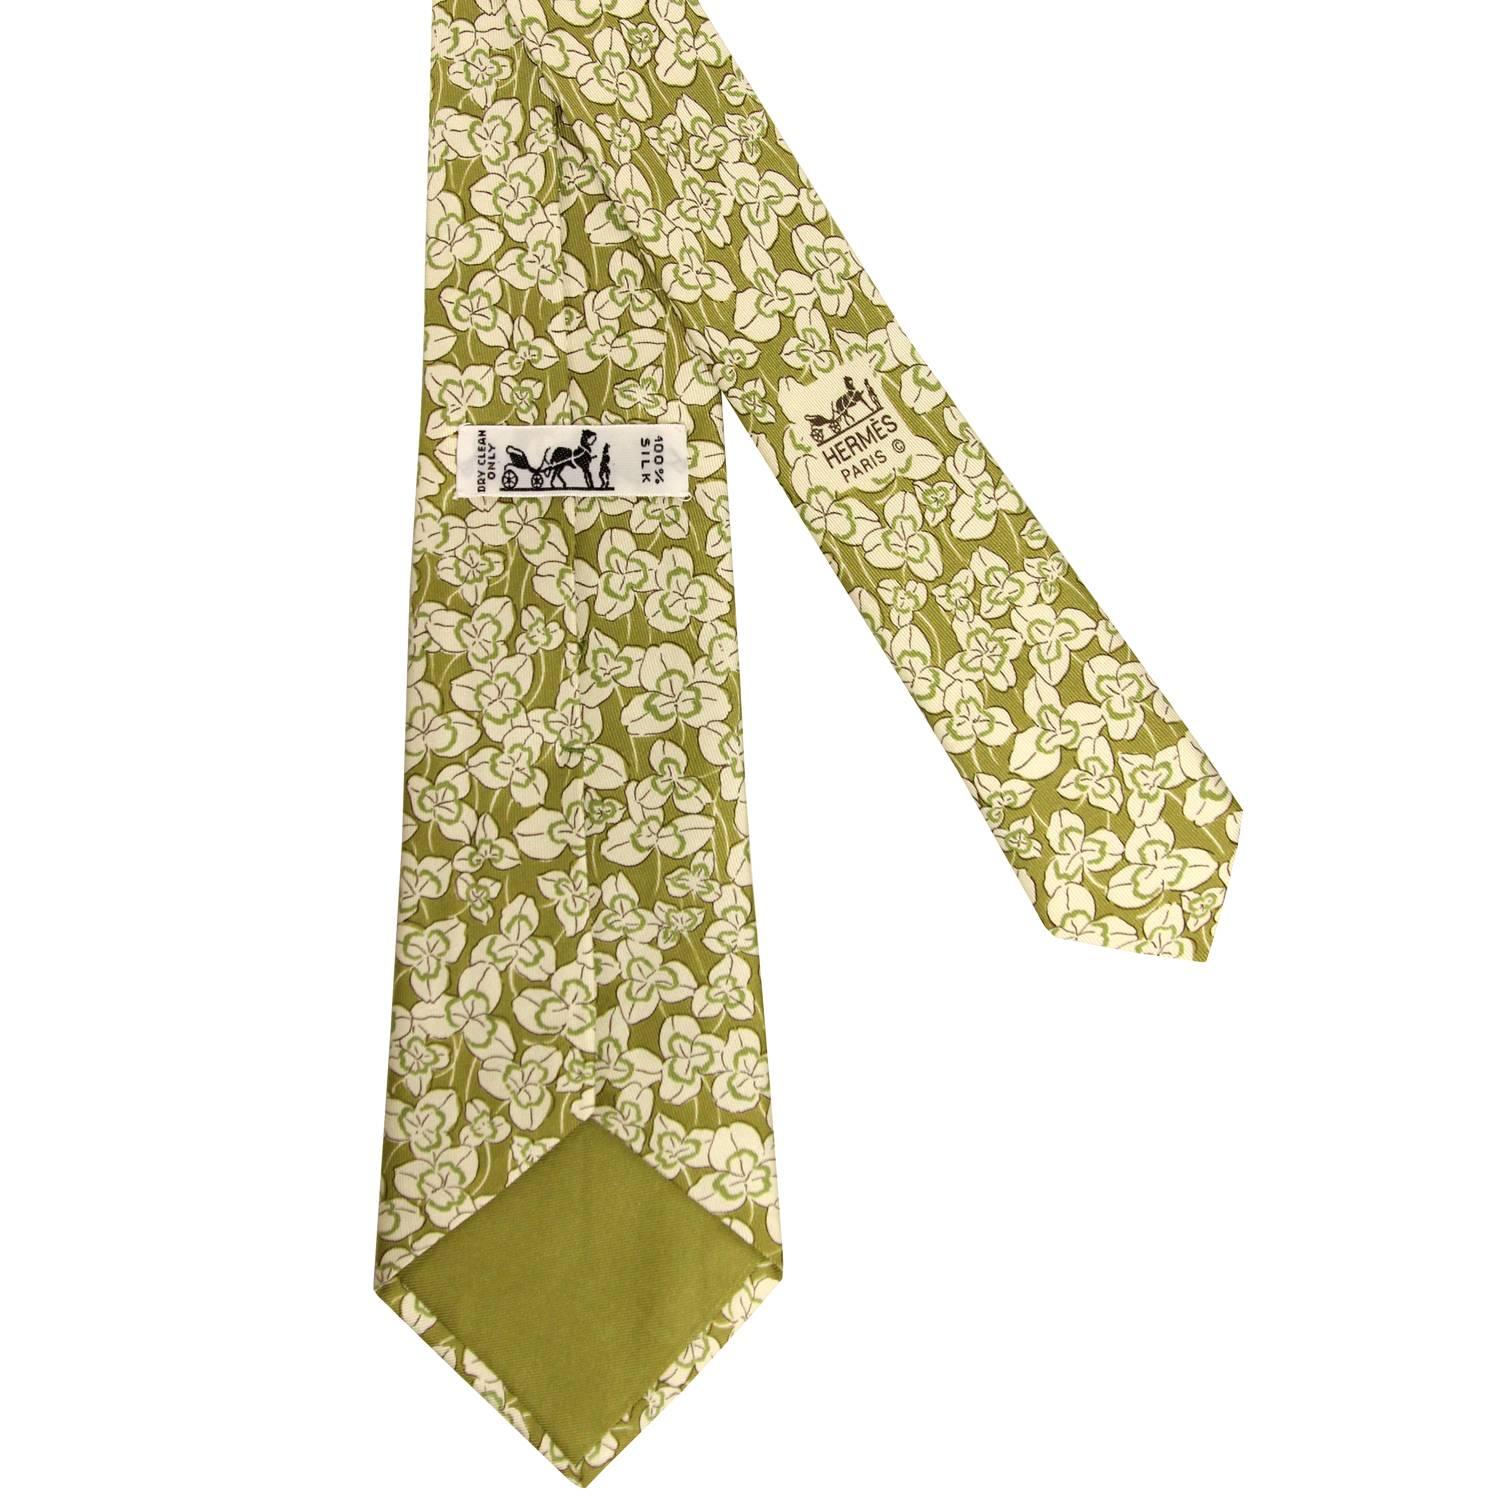 Hermès printed silk vintage tie with green and white clovers pattern. Never worn. The item is vintage, it was produced in the 90s and is in very conditions, flawless. Width: 8